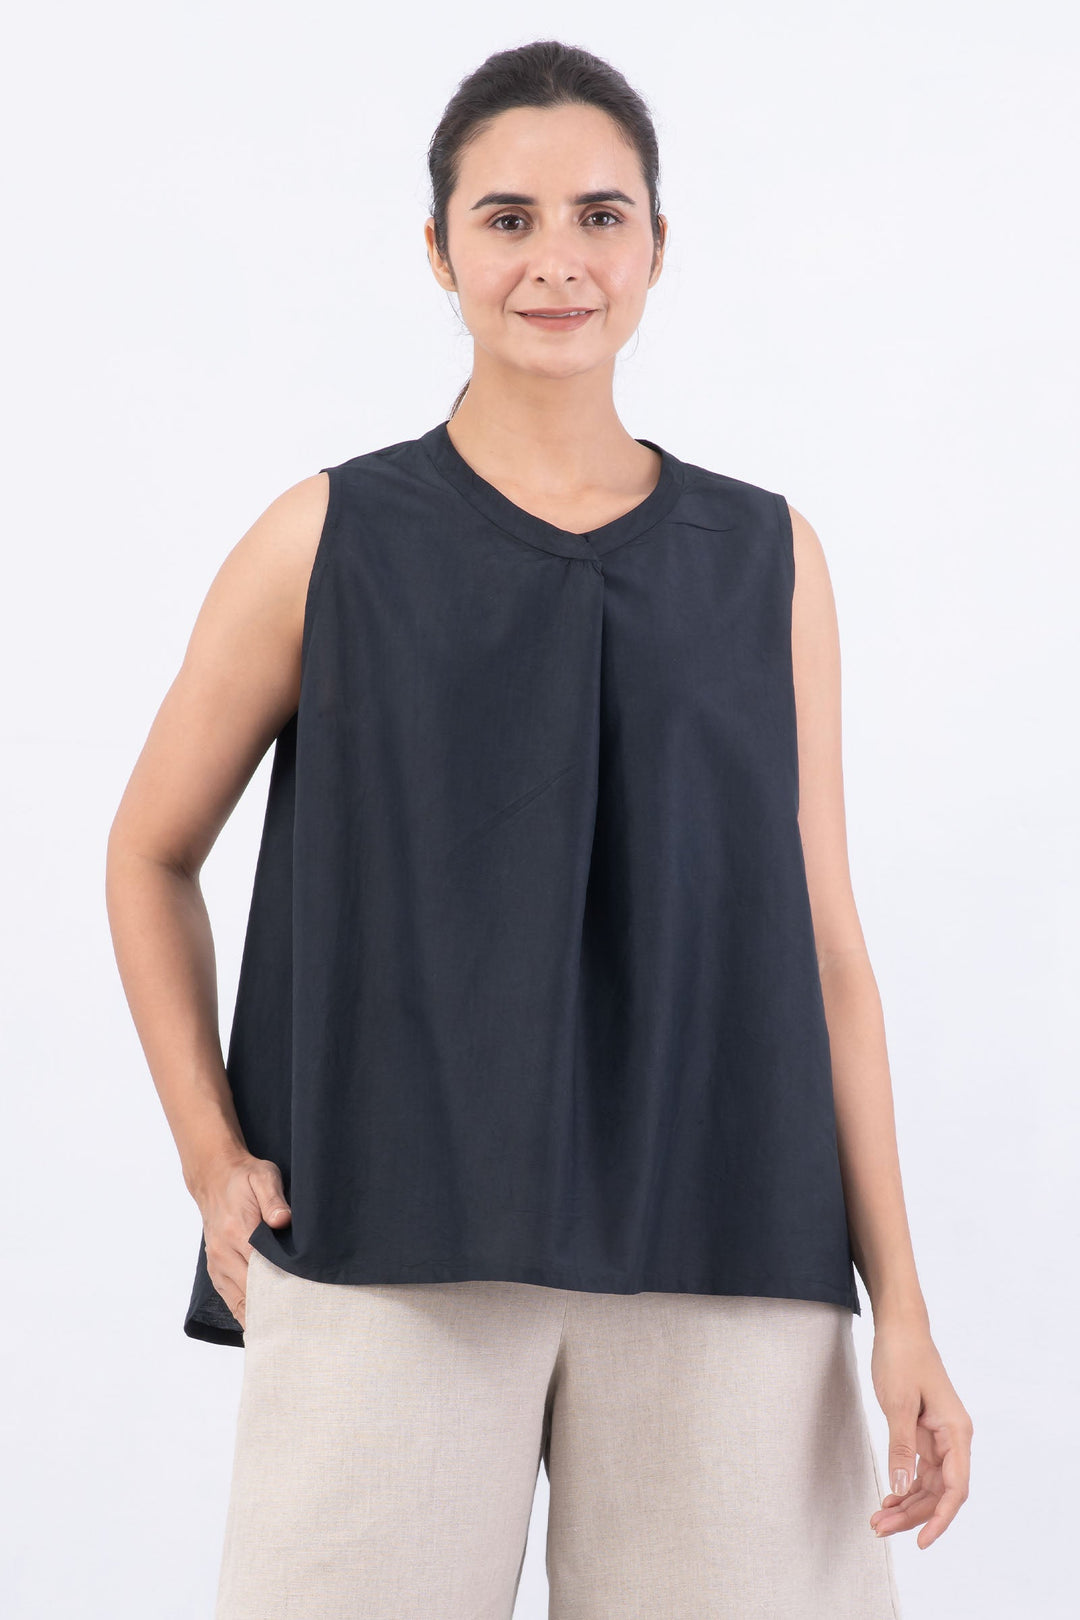 DYED COTTON SILK HEAVY VOILE WAVY BAND COLLAR SHELL TOP - dh1556-blk -